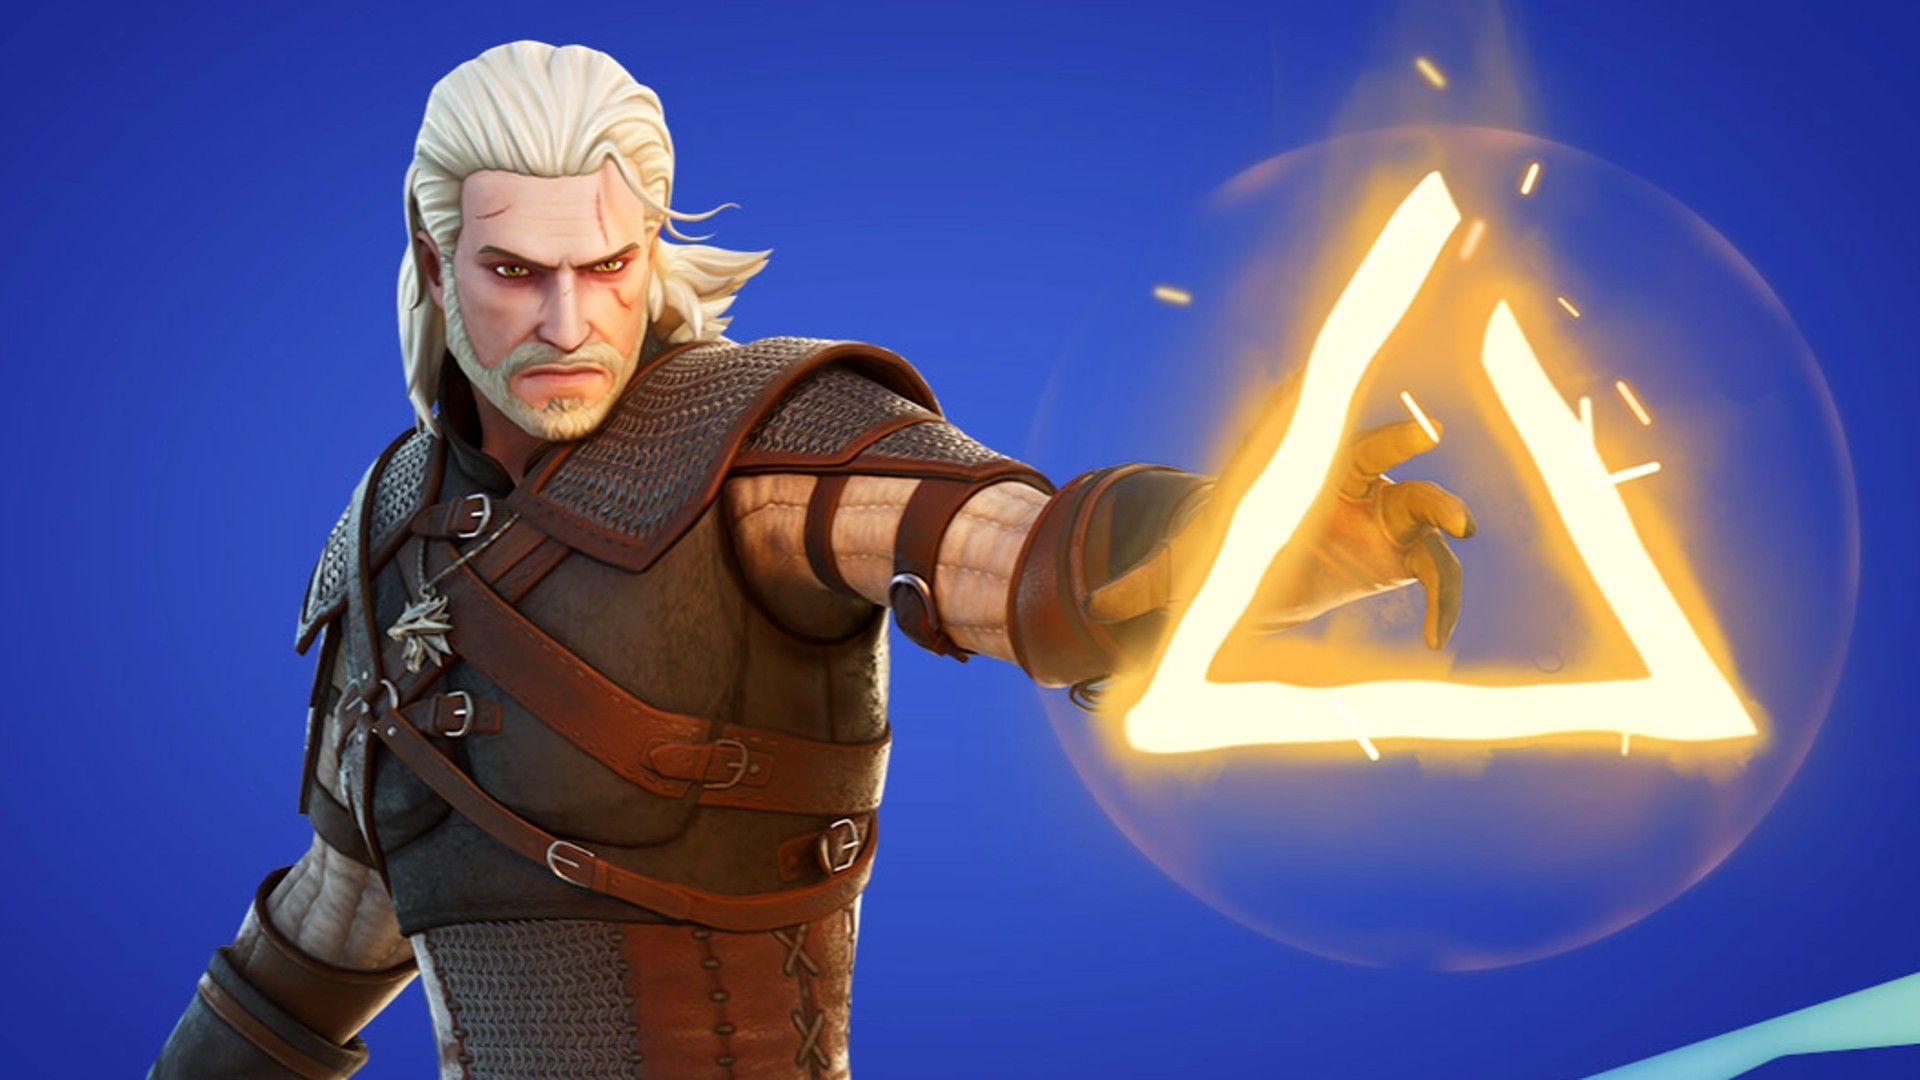 Fortnite eliminate an opponent while mounted: Geralt of Rivia challenges